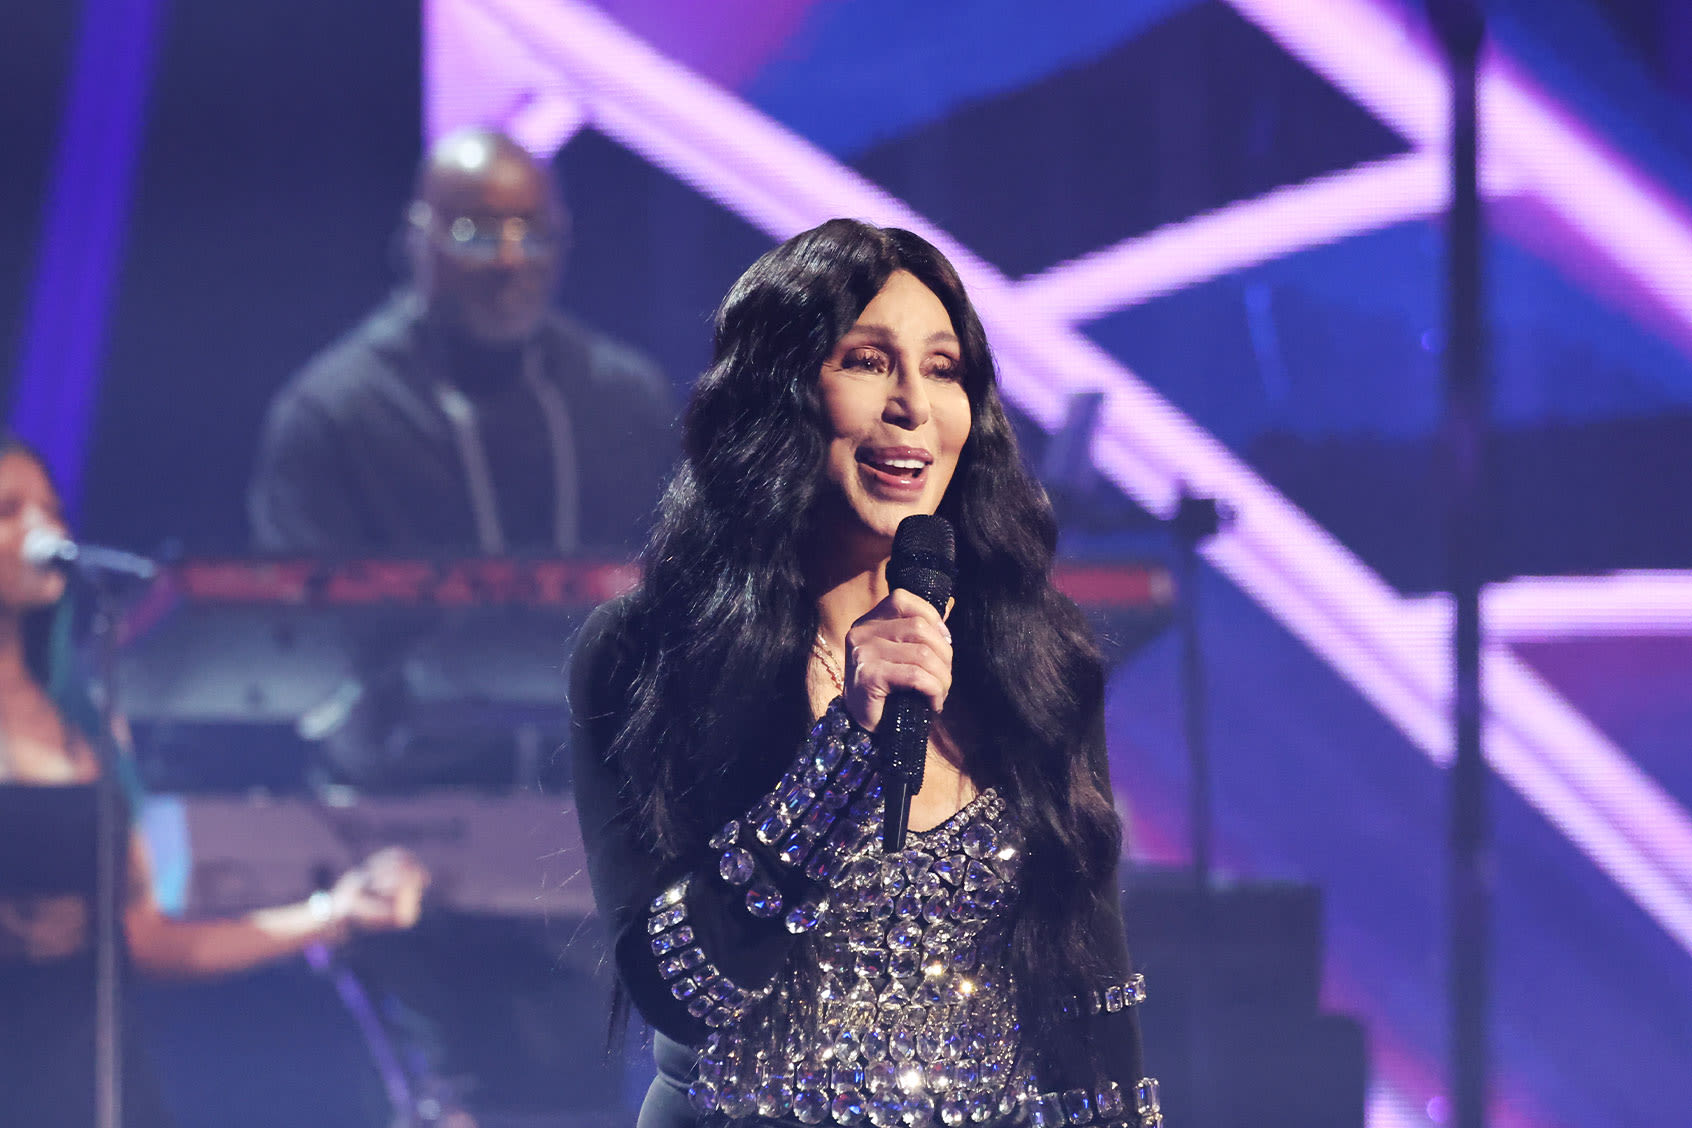 Cher says she dates younger men because men her age are "all dead"